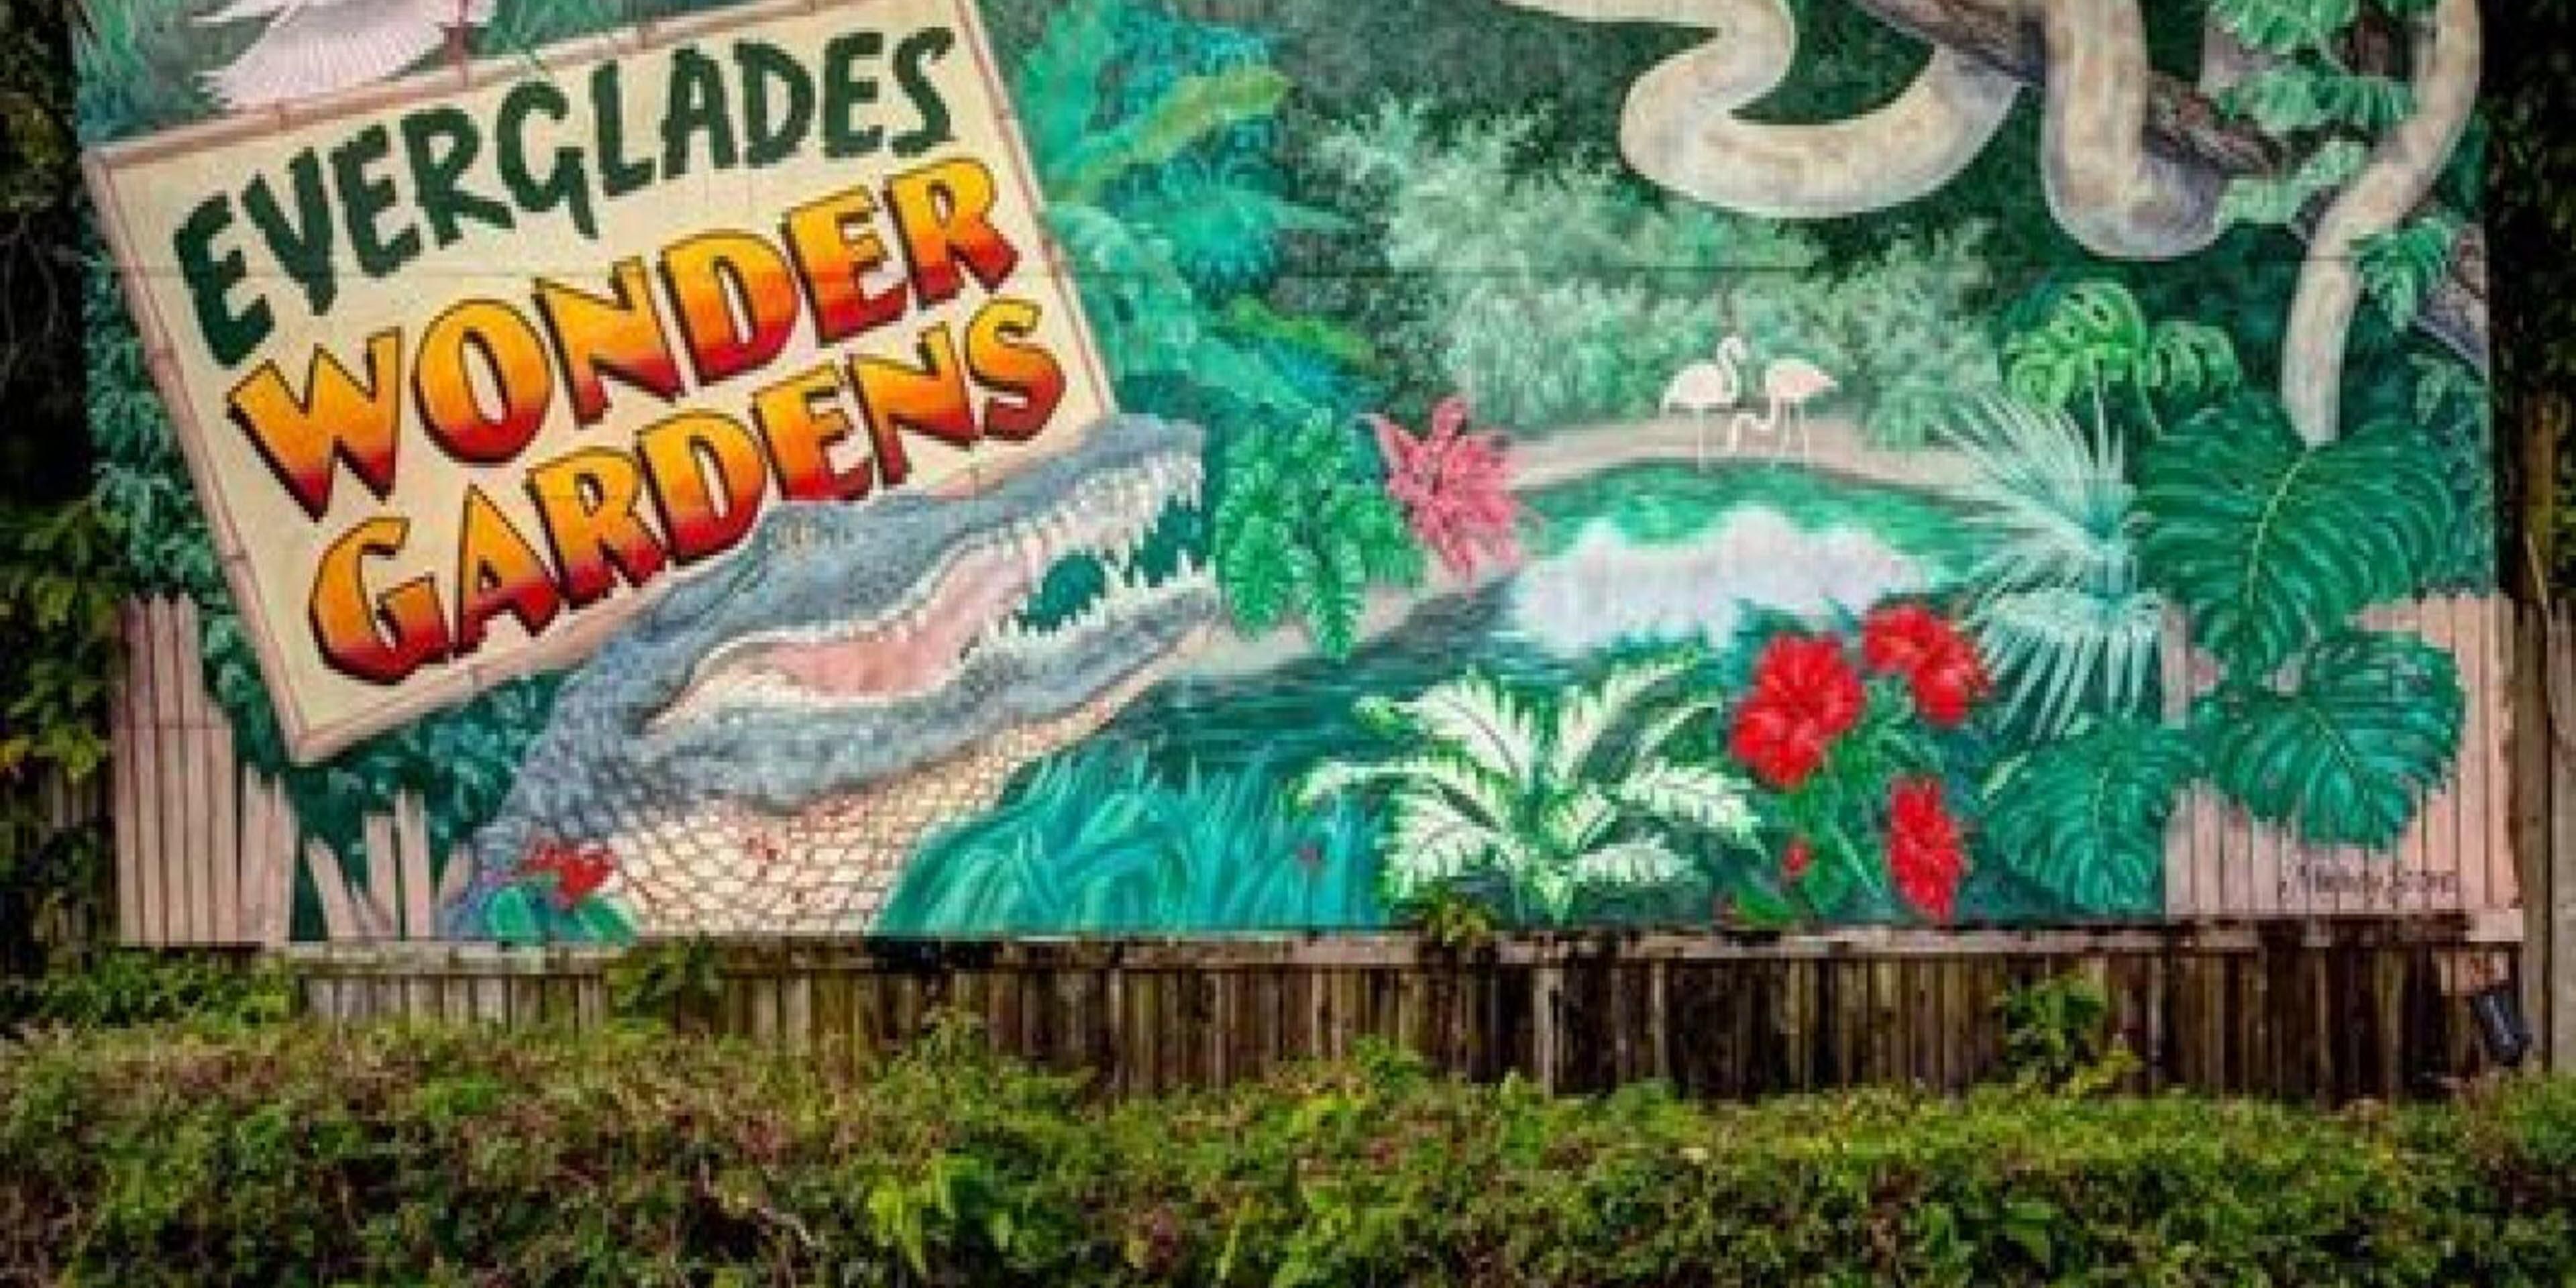 Travel back in time to Old Florida at the historic Everglades Wonder Gardens. Start in the natural history museum, then head outside to explore the 3.5-acre botanical jungle full of native trees, plants, and specimens from around the world. While exploring, you’ll want to feed the flamingos and visit with the rescued birds and reptiles.